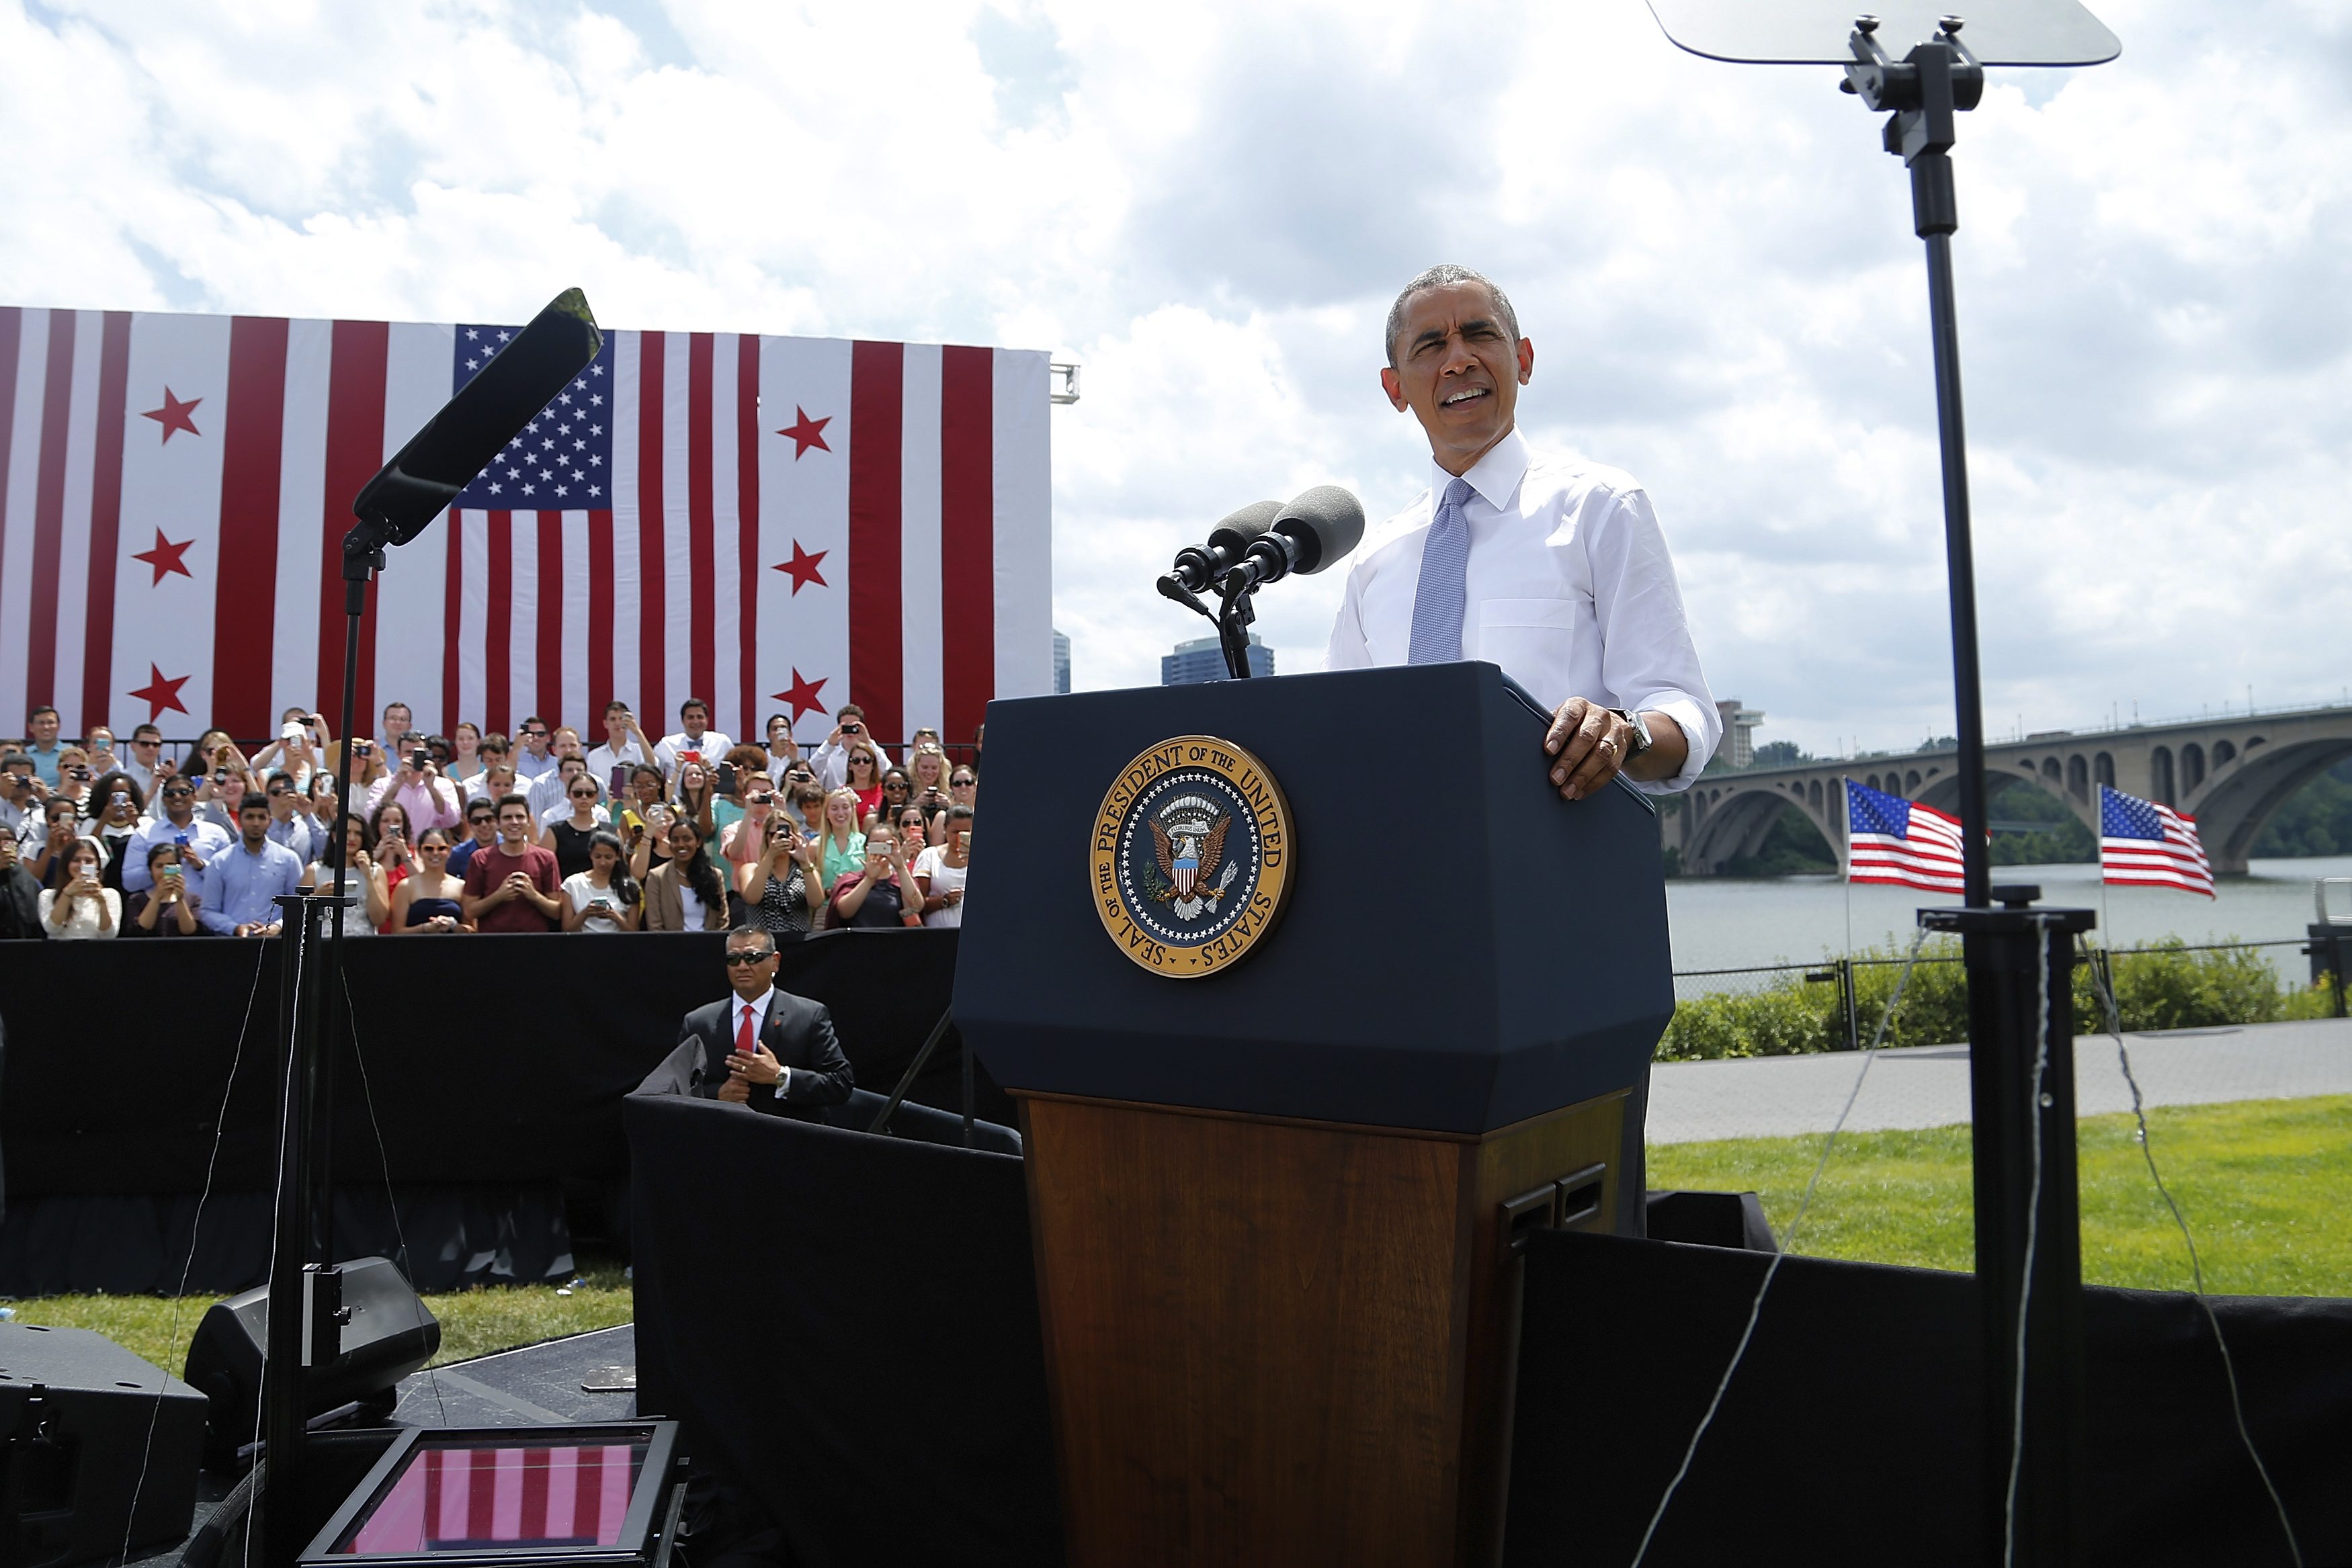 U.S. President Barack Obama makes remarks on the economy at the Georgetown Waterfront Park in Washington